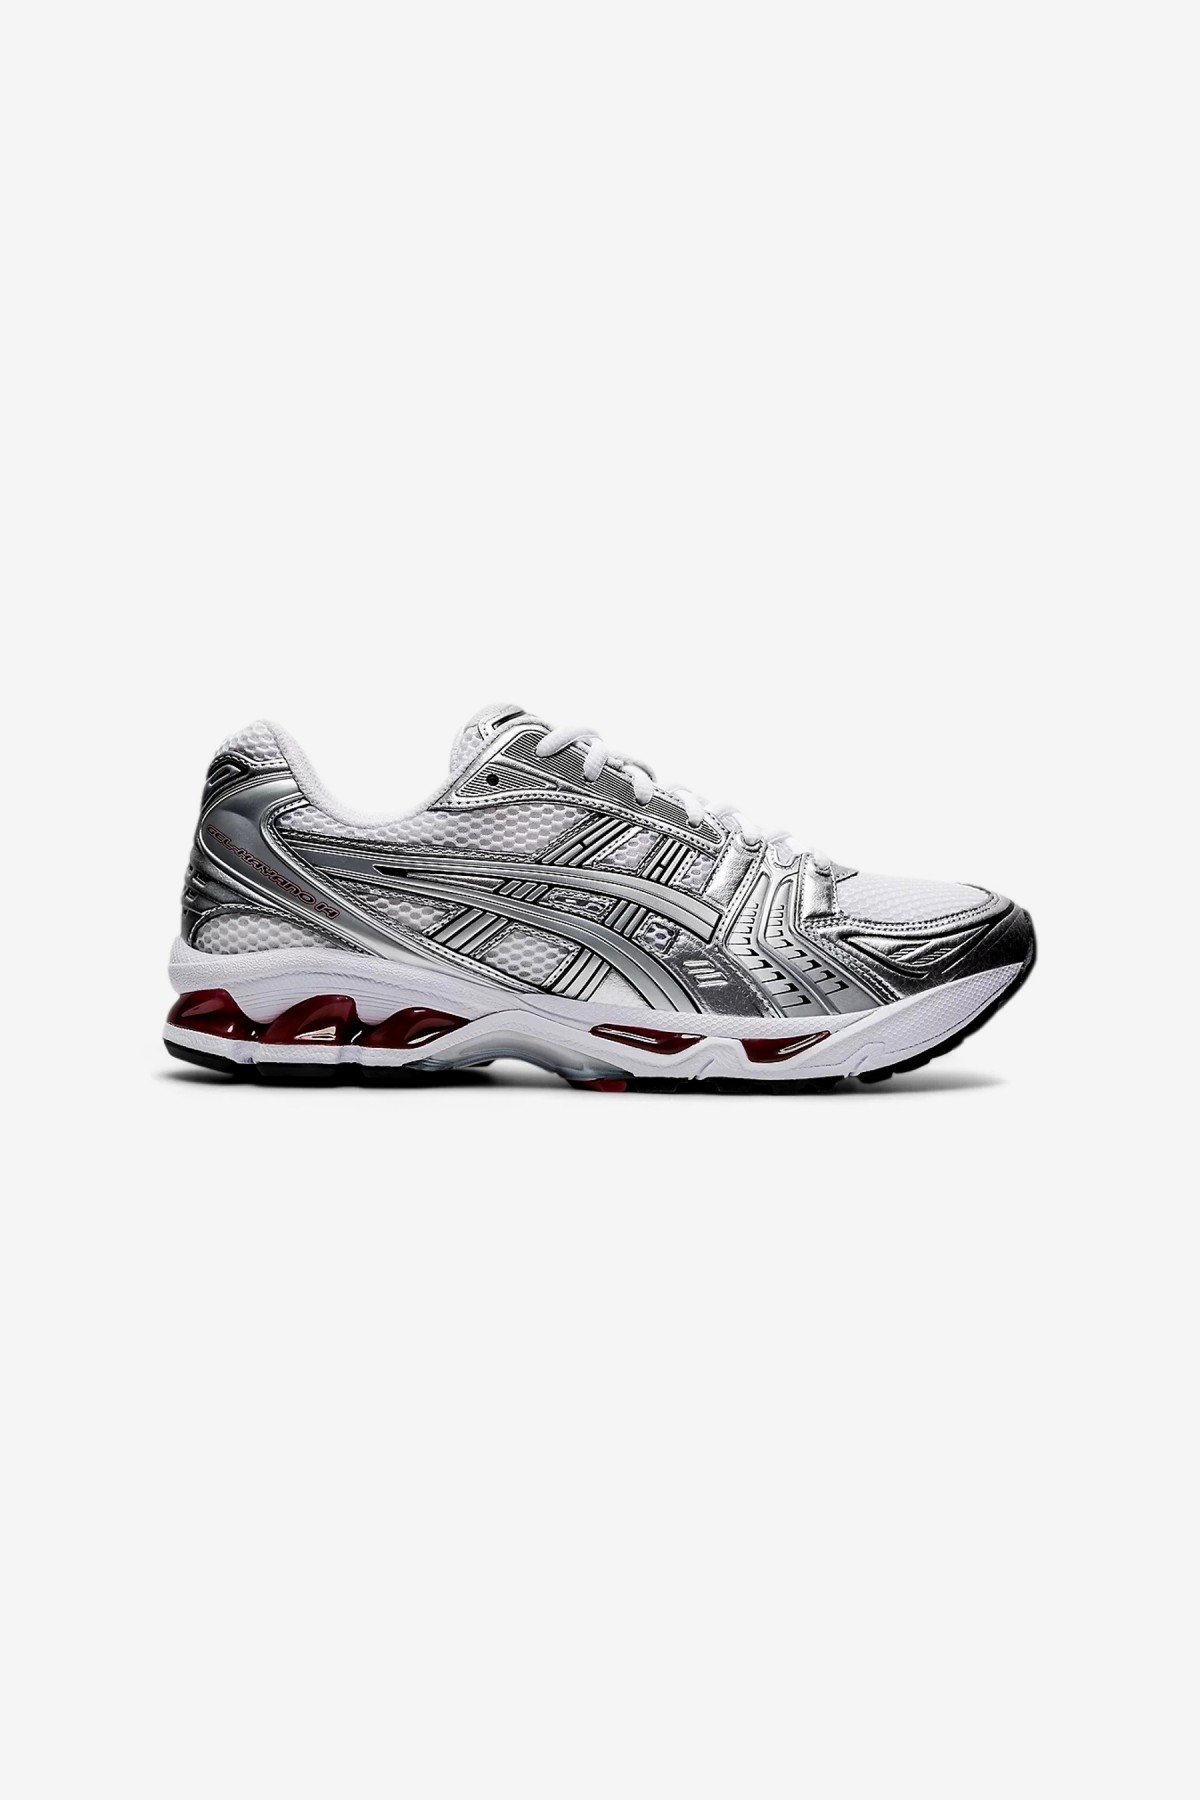 Asics Gel-Kayano 14 in White/Pure Silver